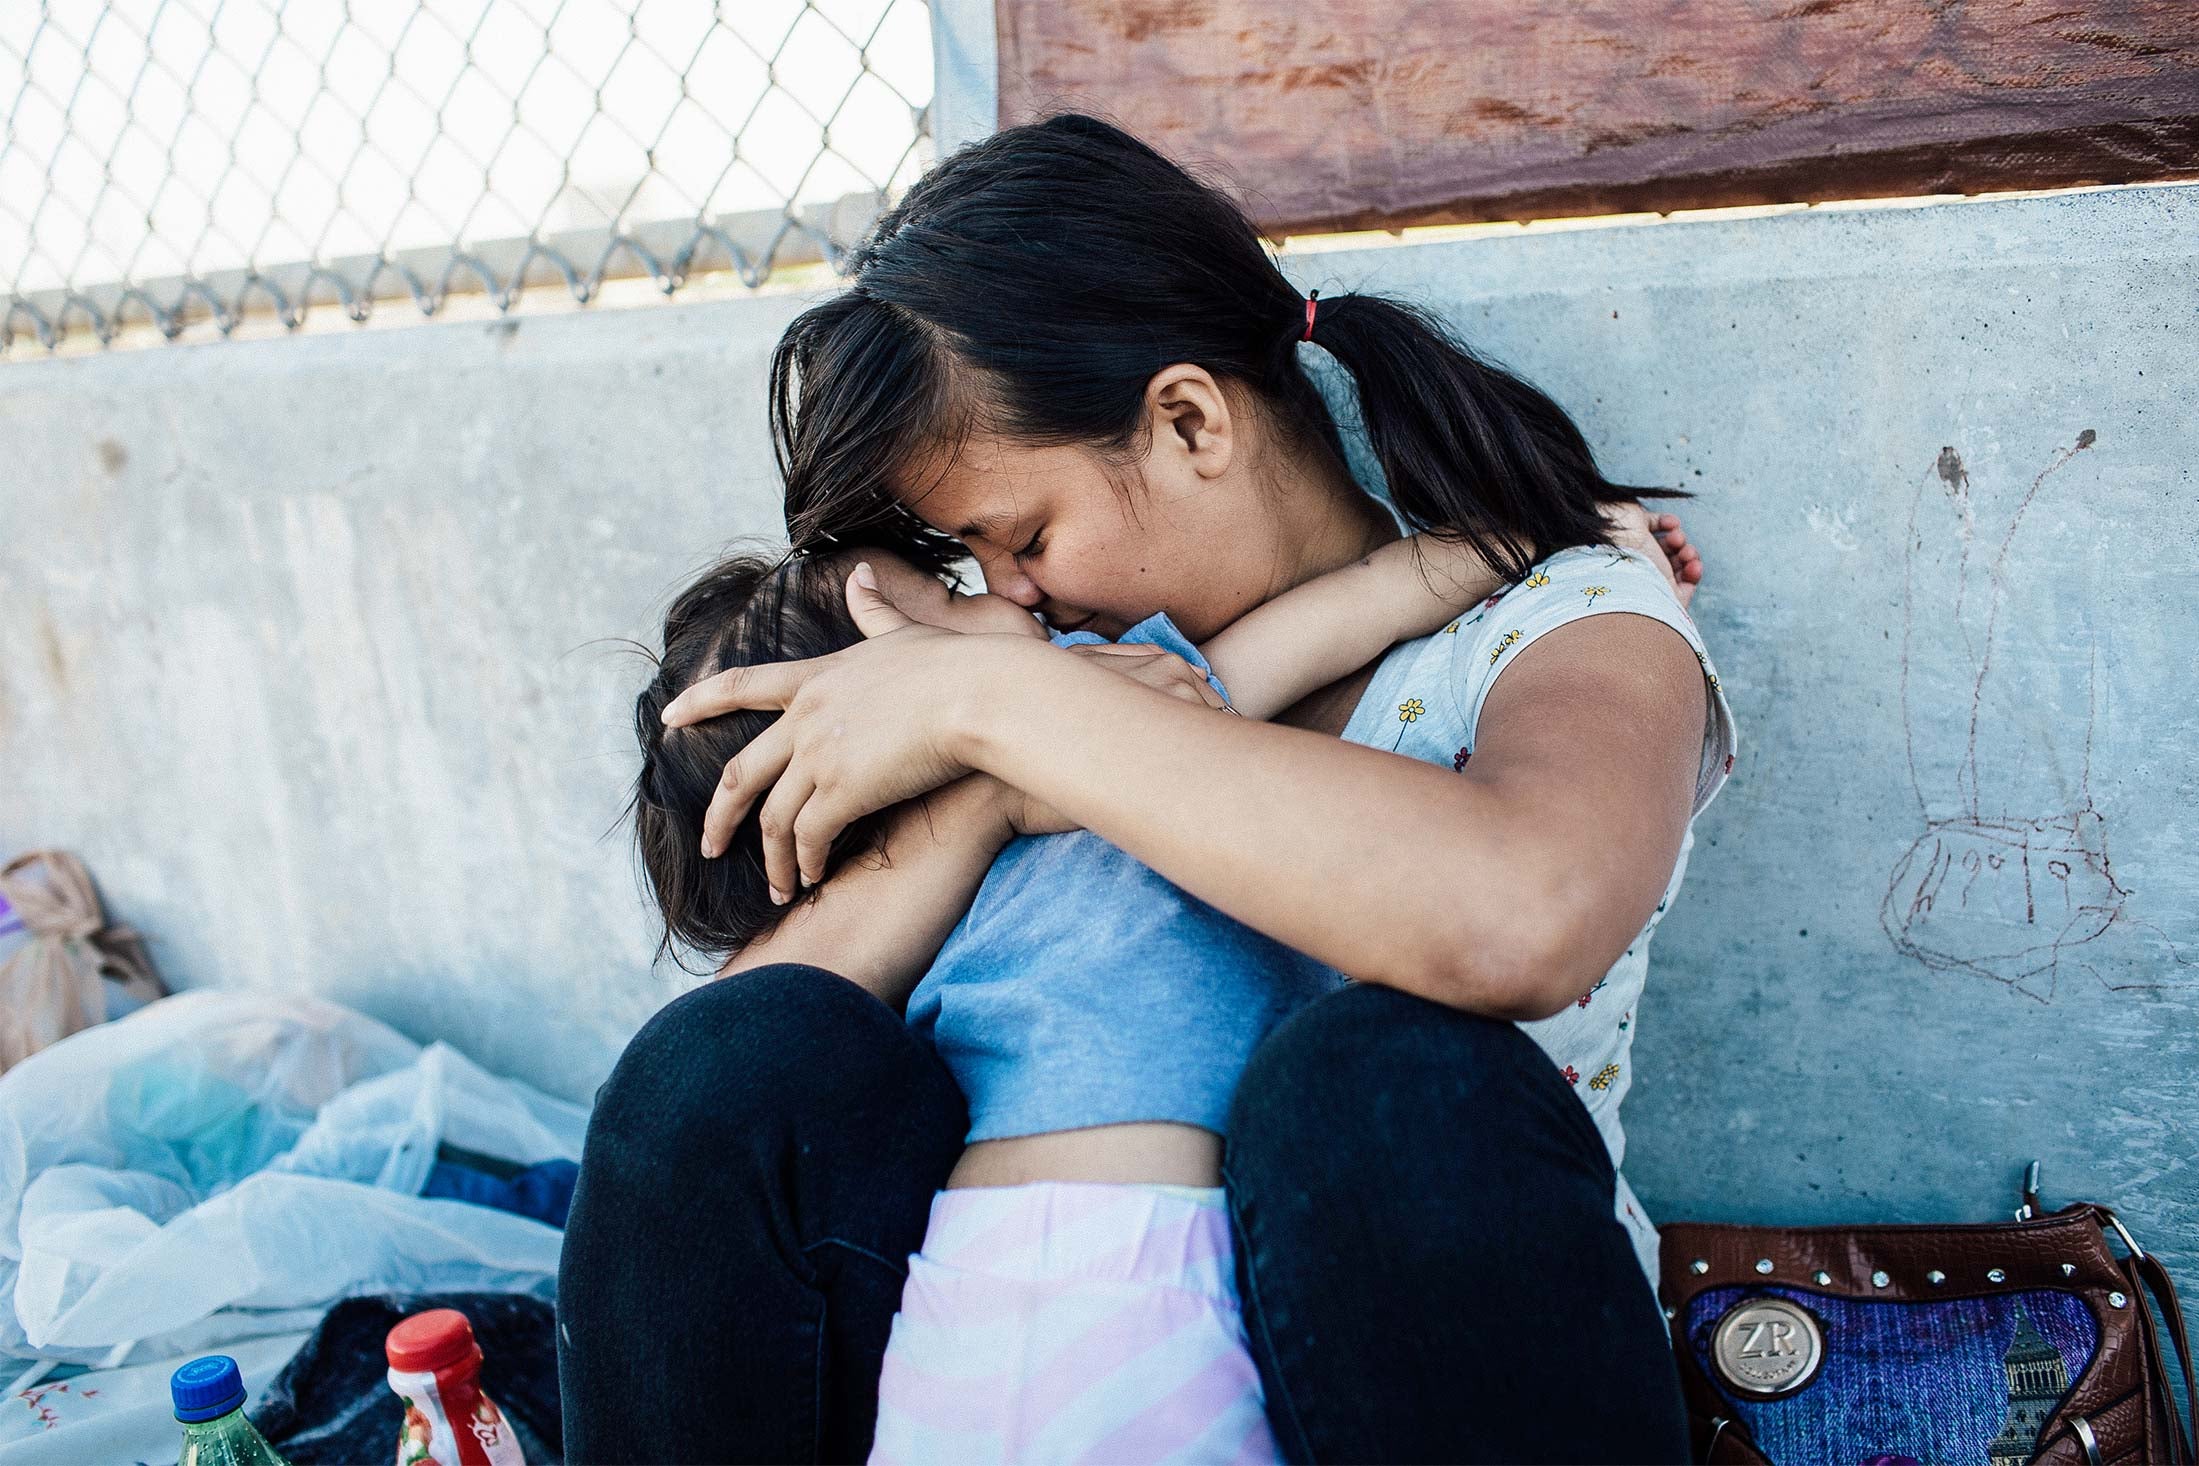 A Honduran woman embraces her 2-year-old daughter as they wait on the Mexican side of the Brownsville & Matamoros International Bridge.